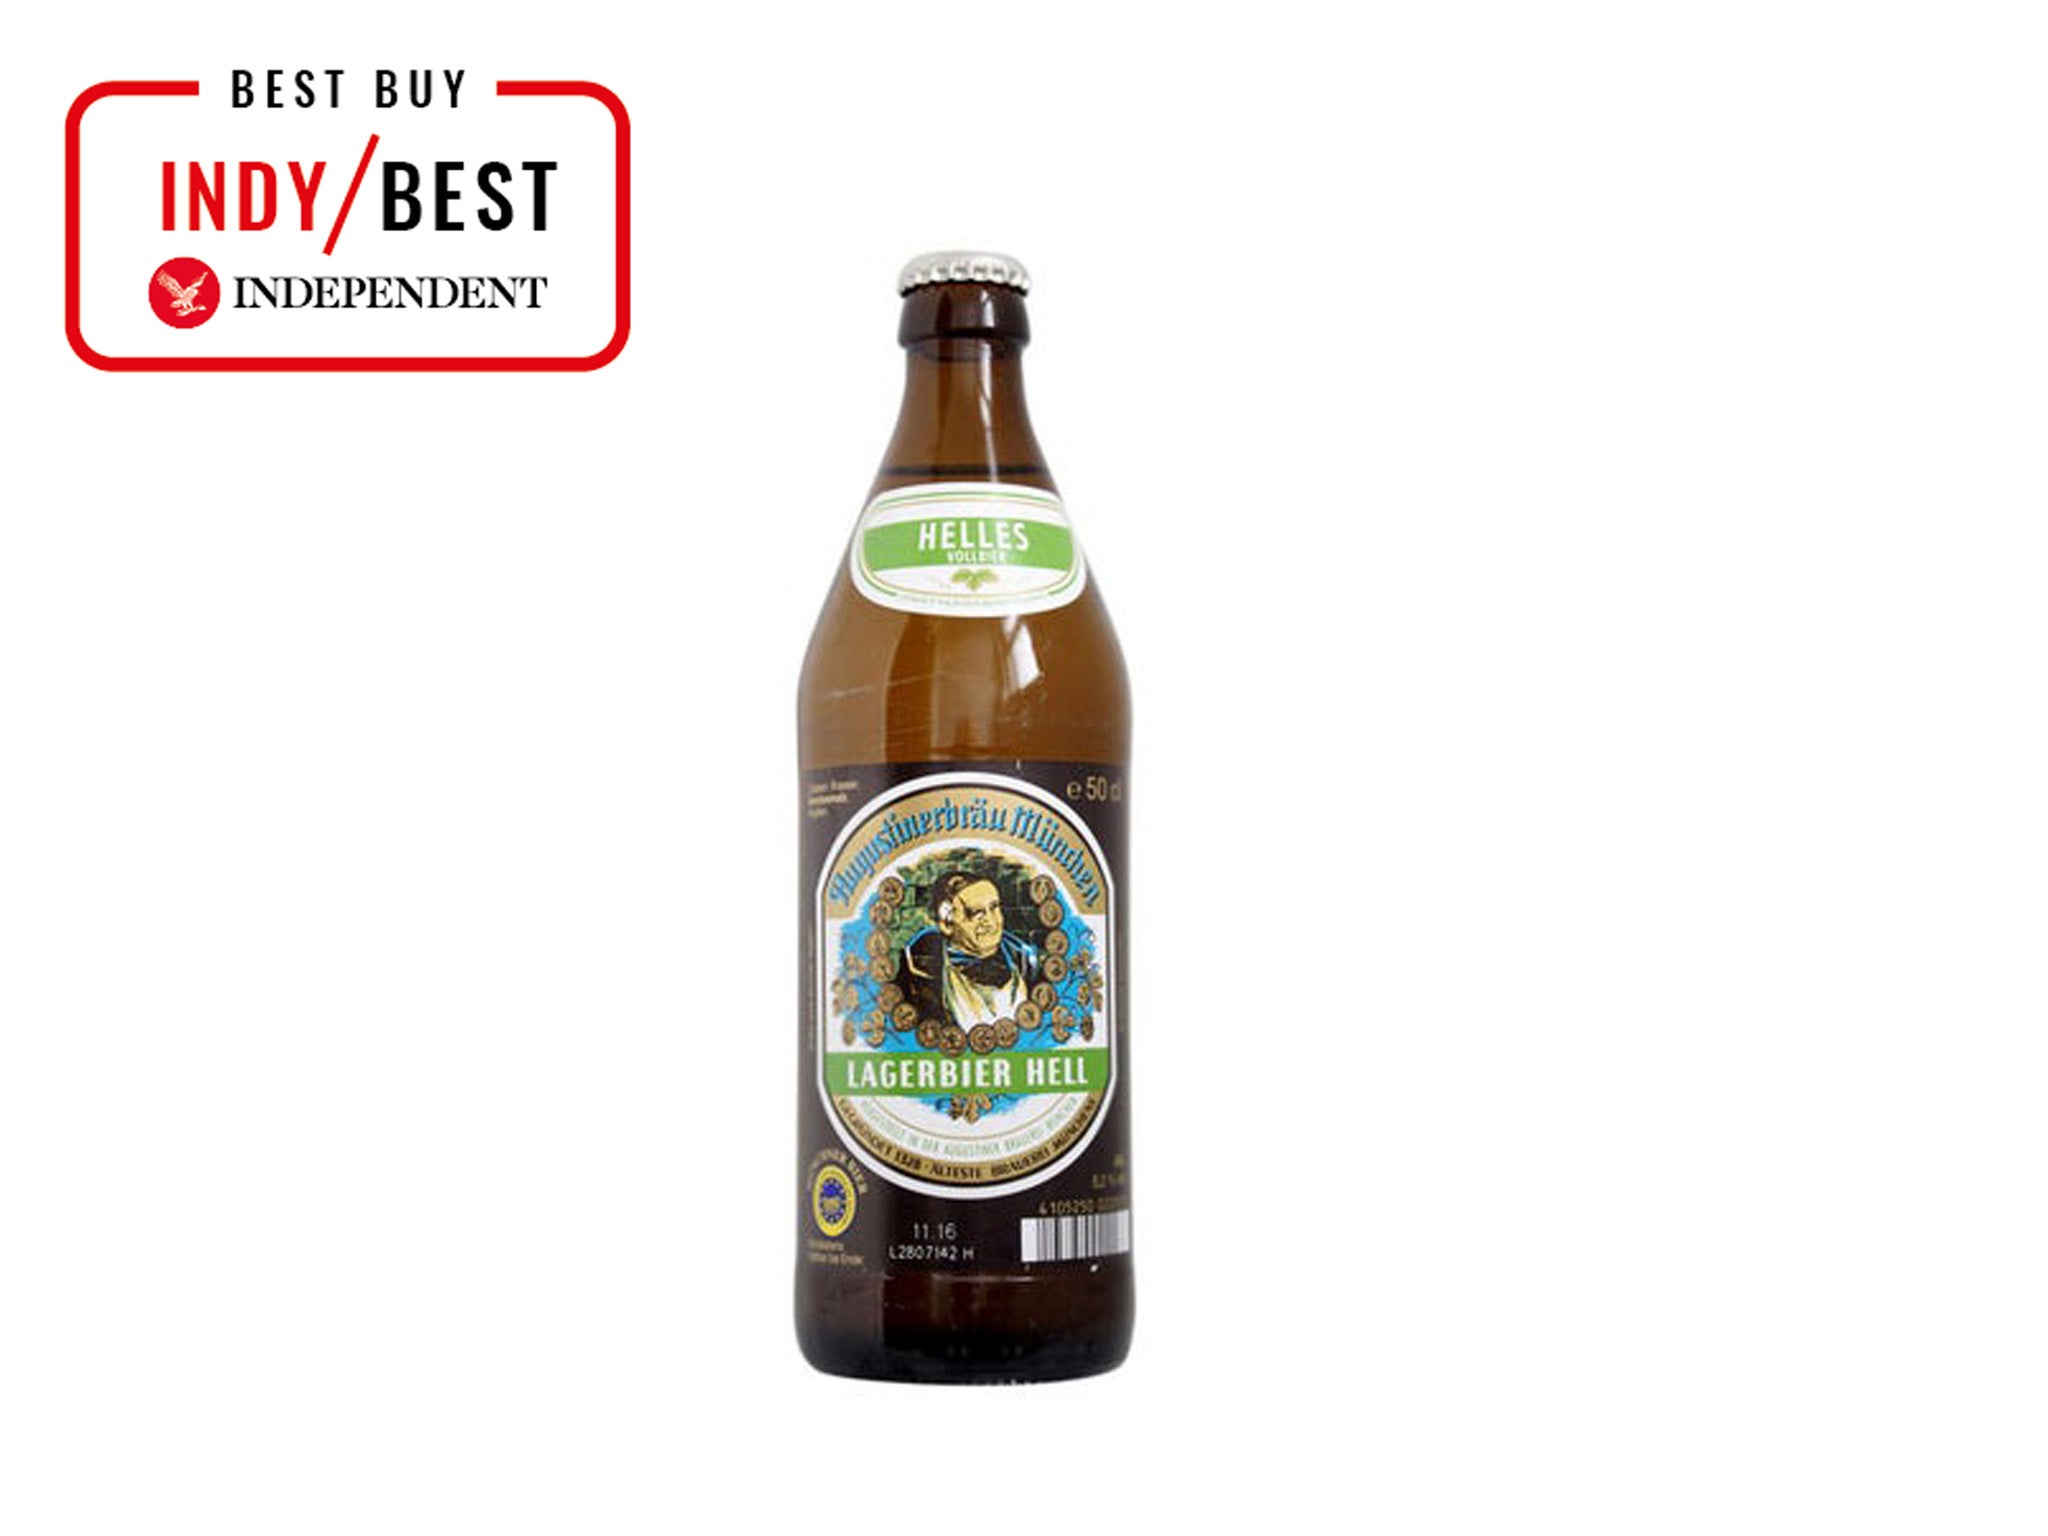 Soft and smooth, say cheers to this German beer that we loved